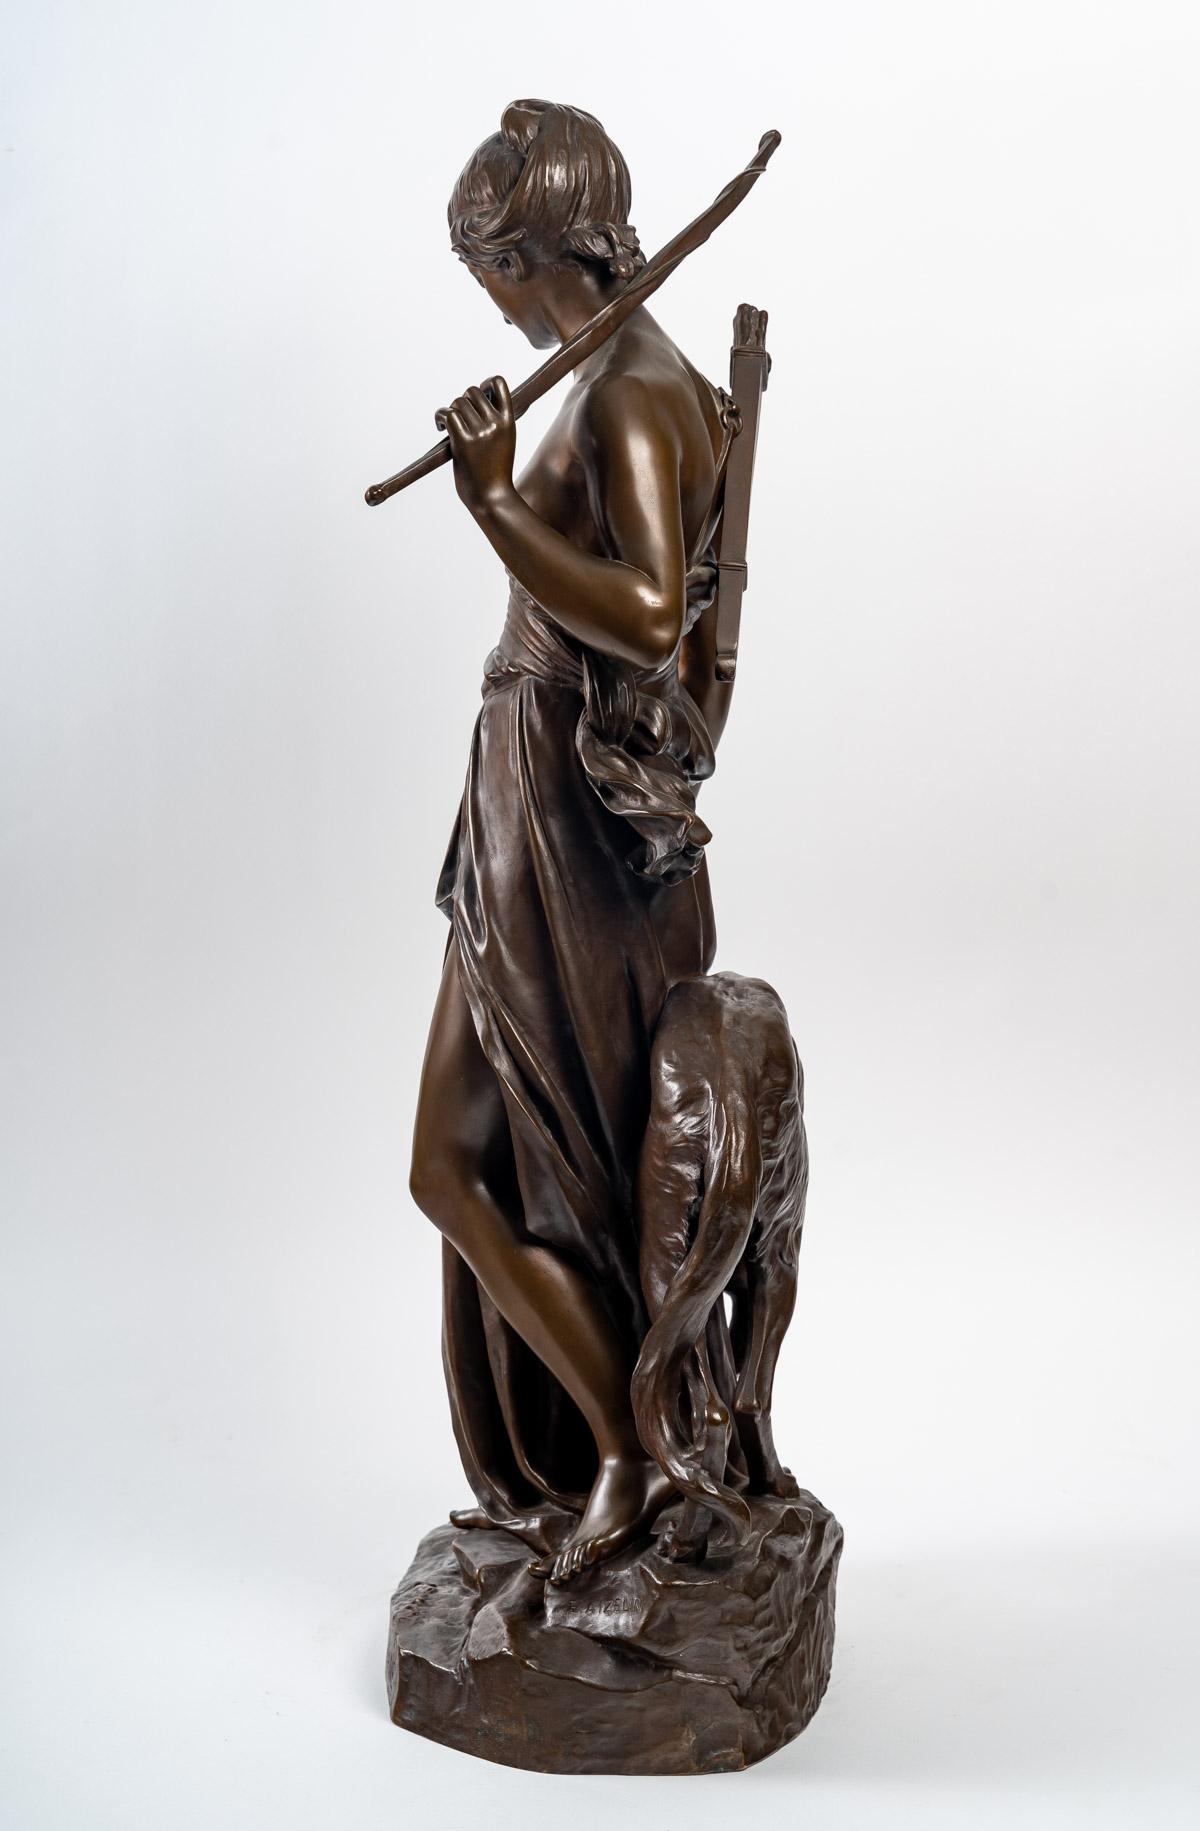 Diane with her dog, bronze sculpture, Napoleon III period, 19th century.
Signed Aizelin and foundry Barbedienne.
Measures: H: 77 cm, W: 35 cm, D: 20 cm.